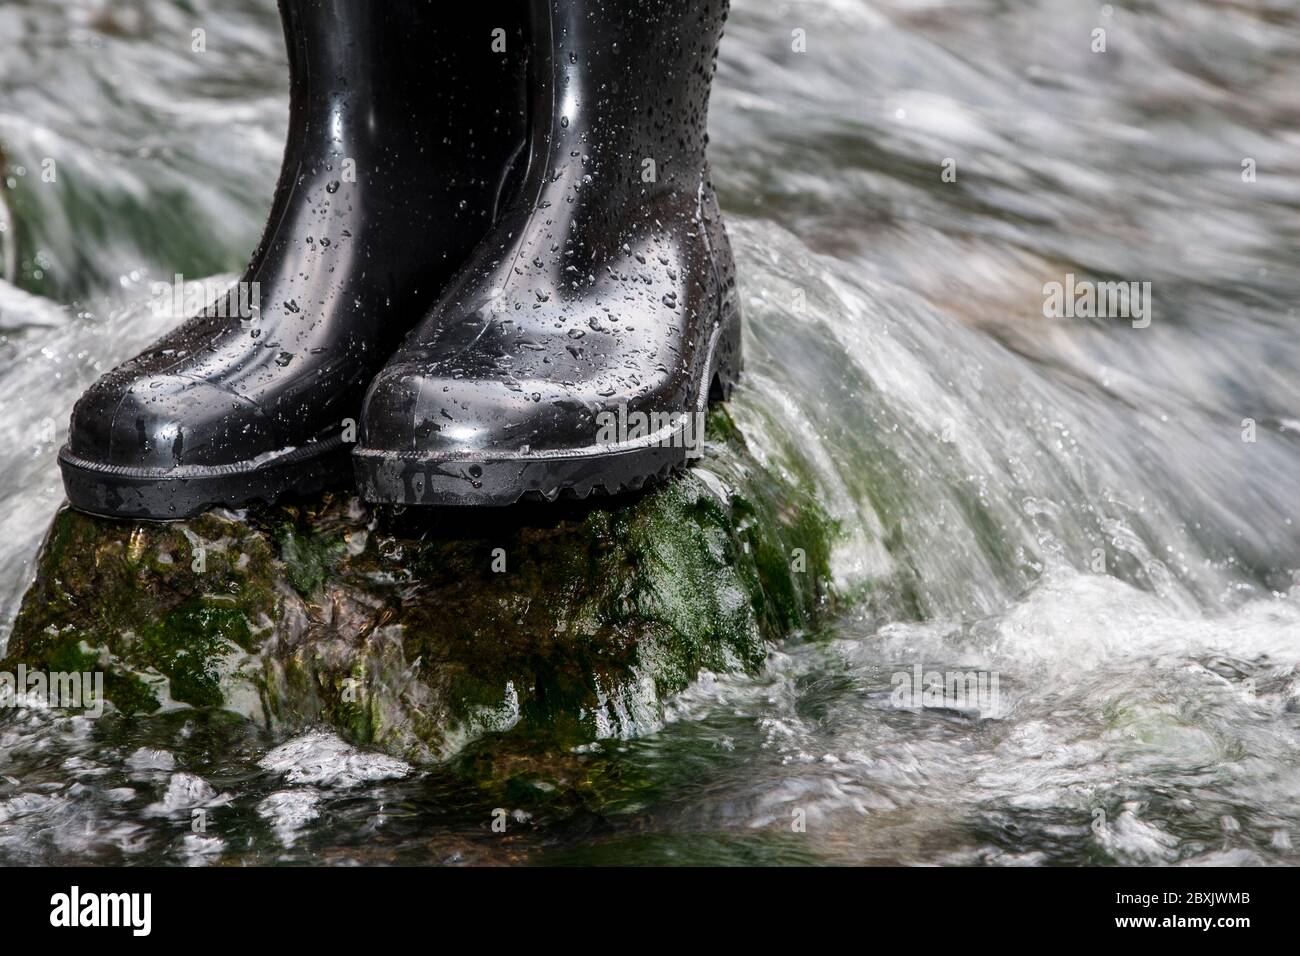 Two wet-sprayed rubber boots stand on a stone in the roaring water of a stream. Rubber boots keep your feet dry even in wet terrain. Stock Photo